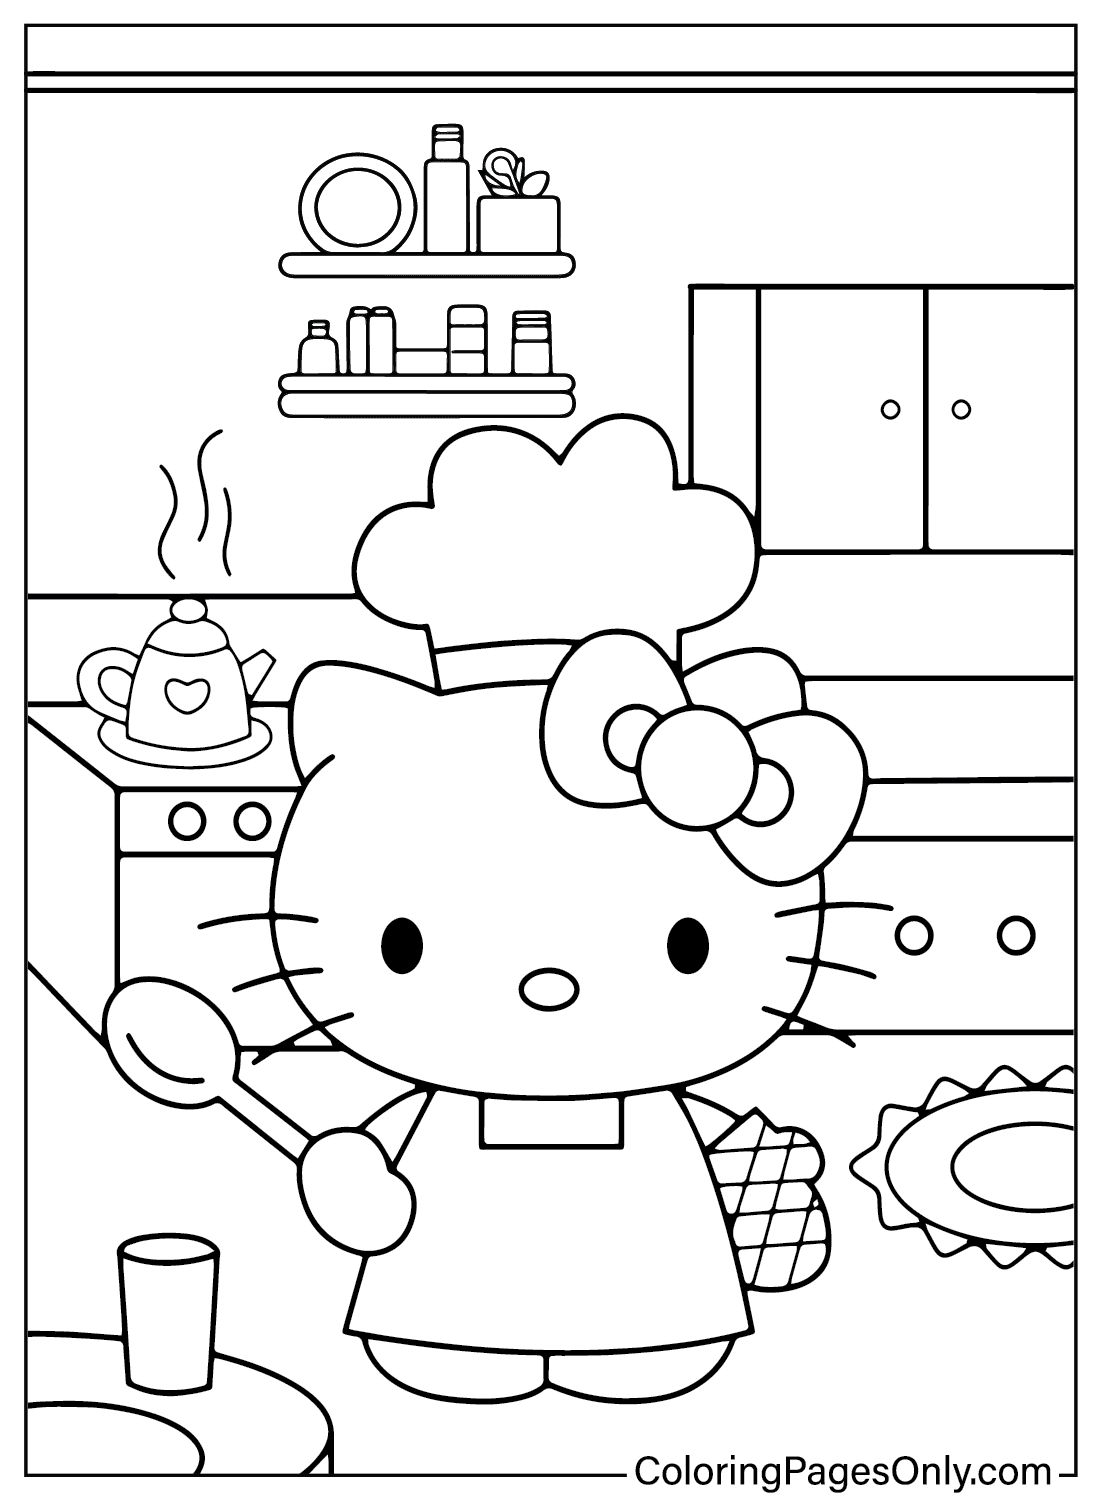 Hello Kitty Coloring Page PDF